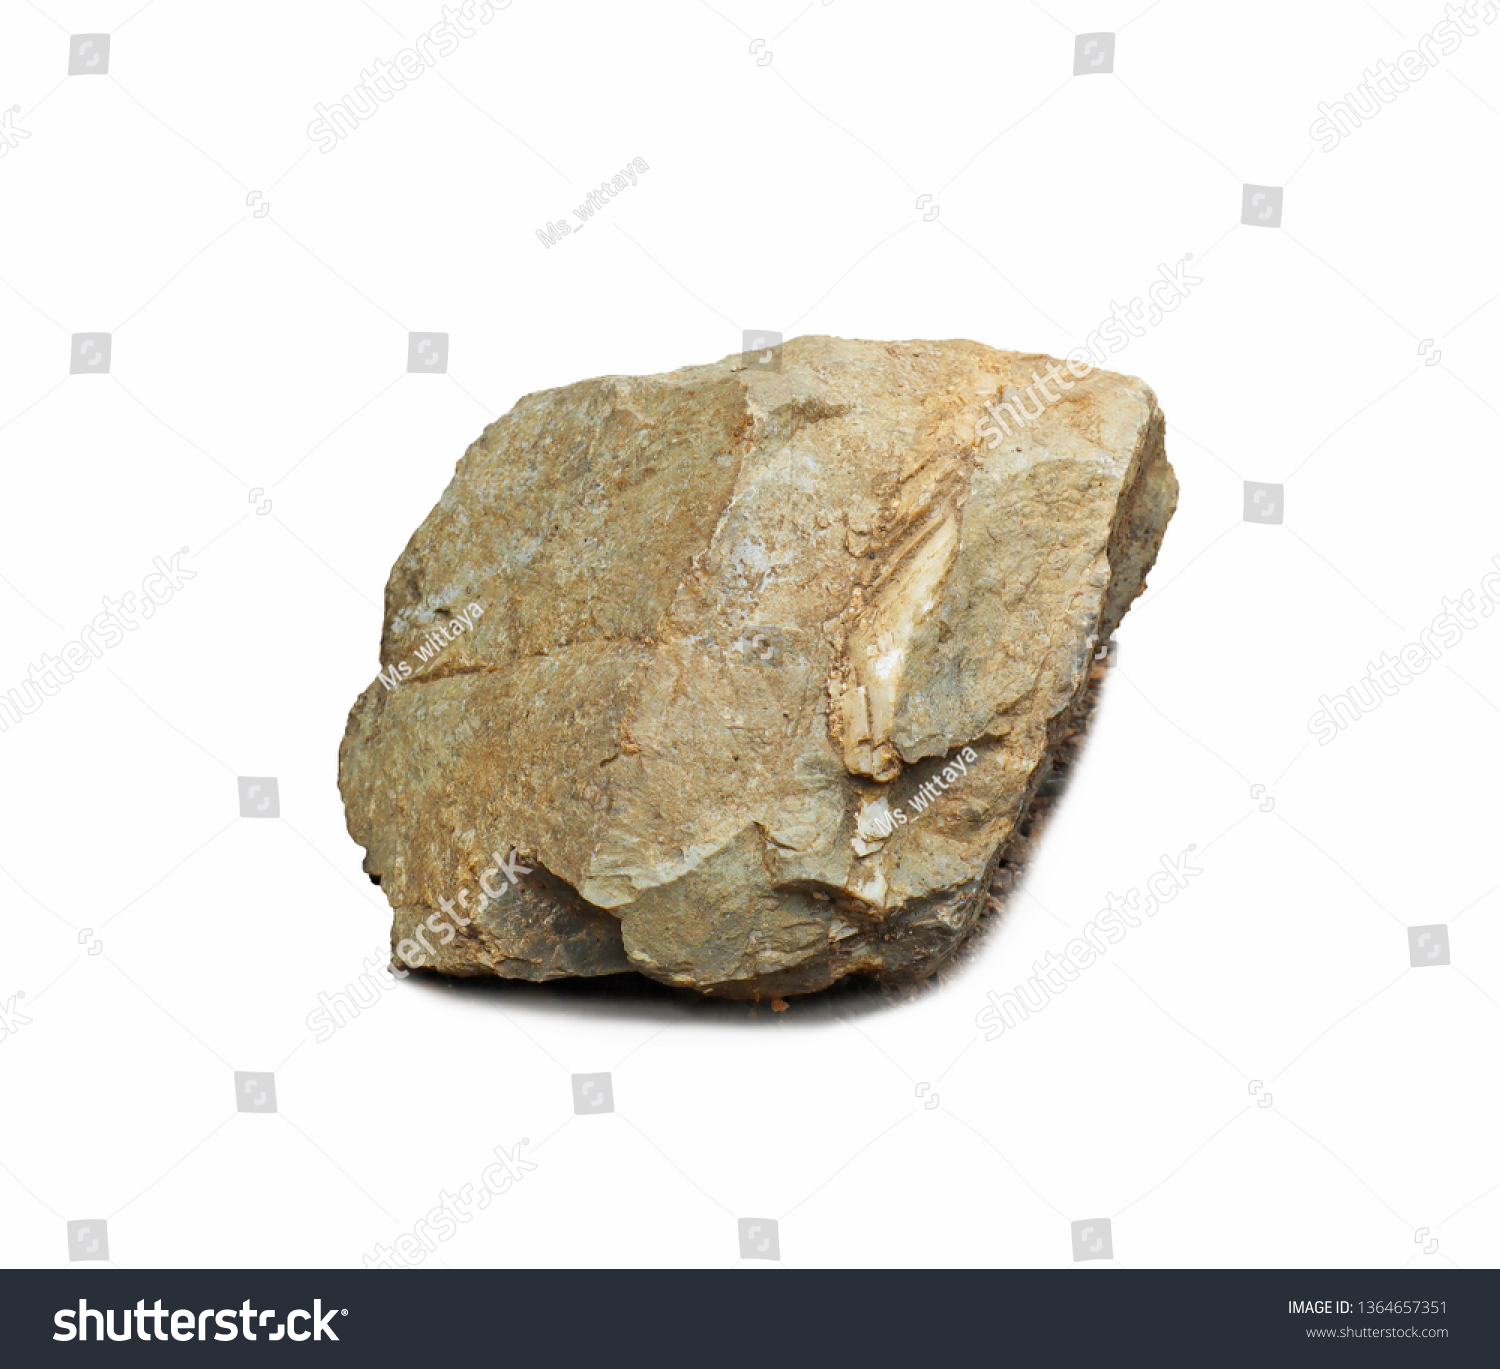 close up a group of stones big rock lay isolated on white background,clipping paths #1364657351